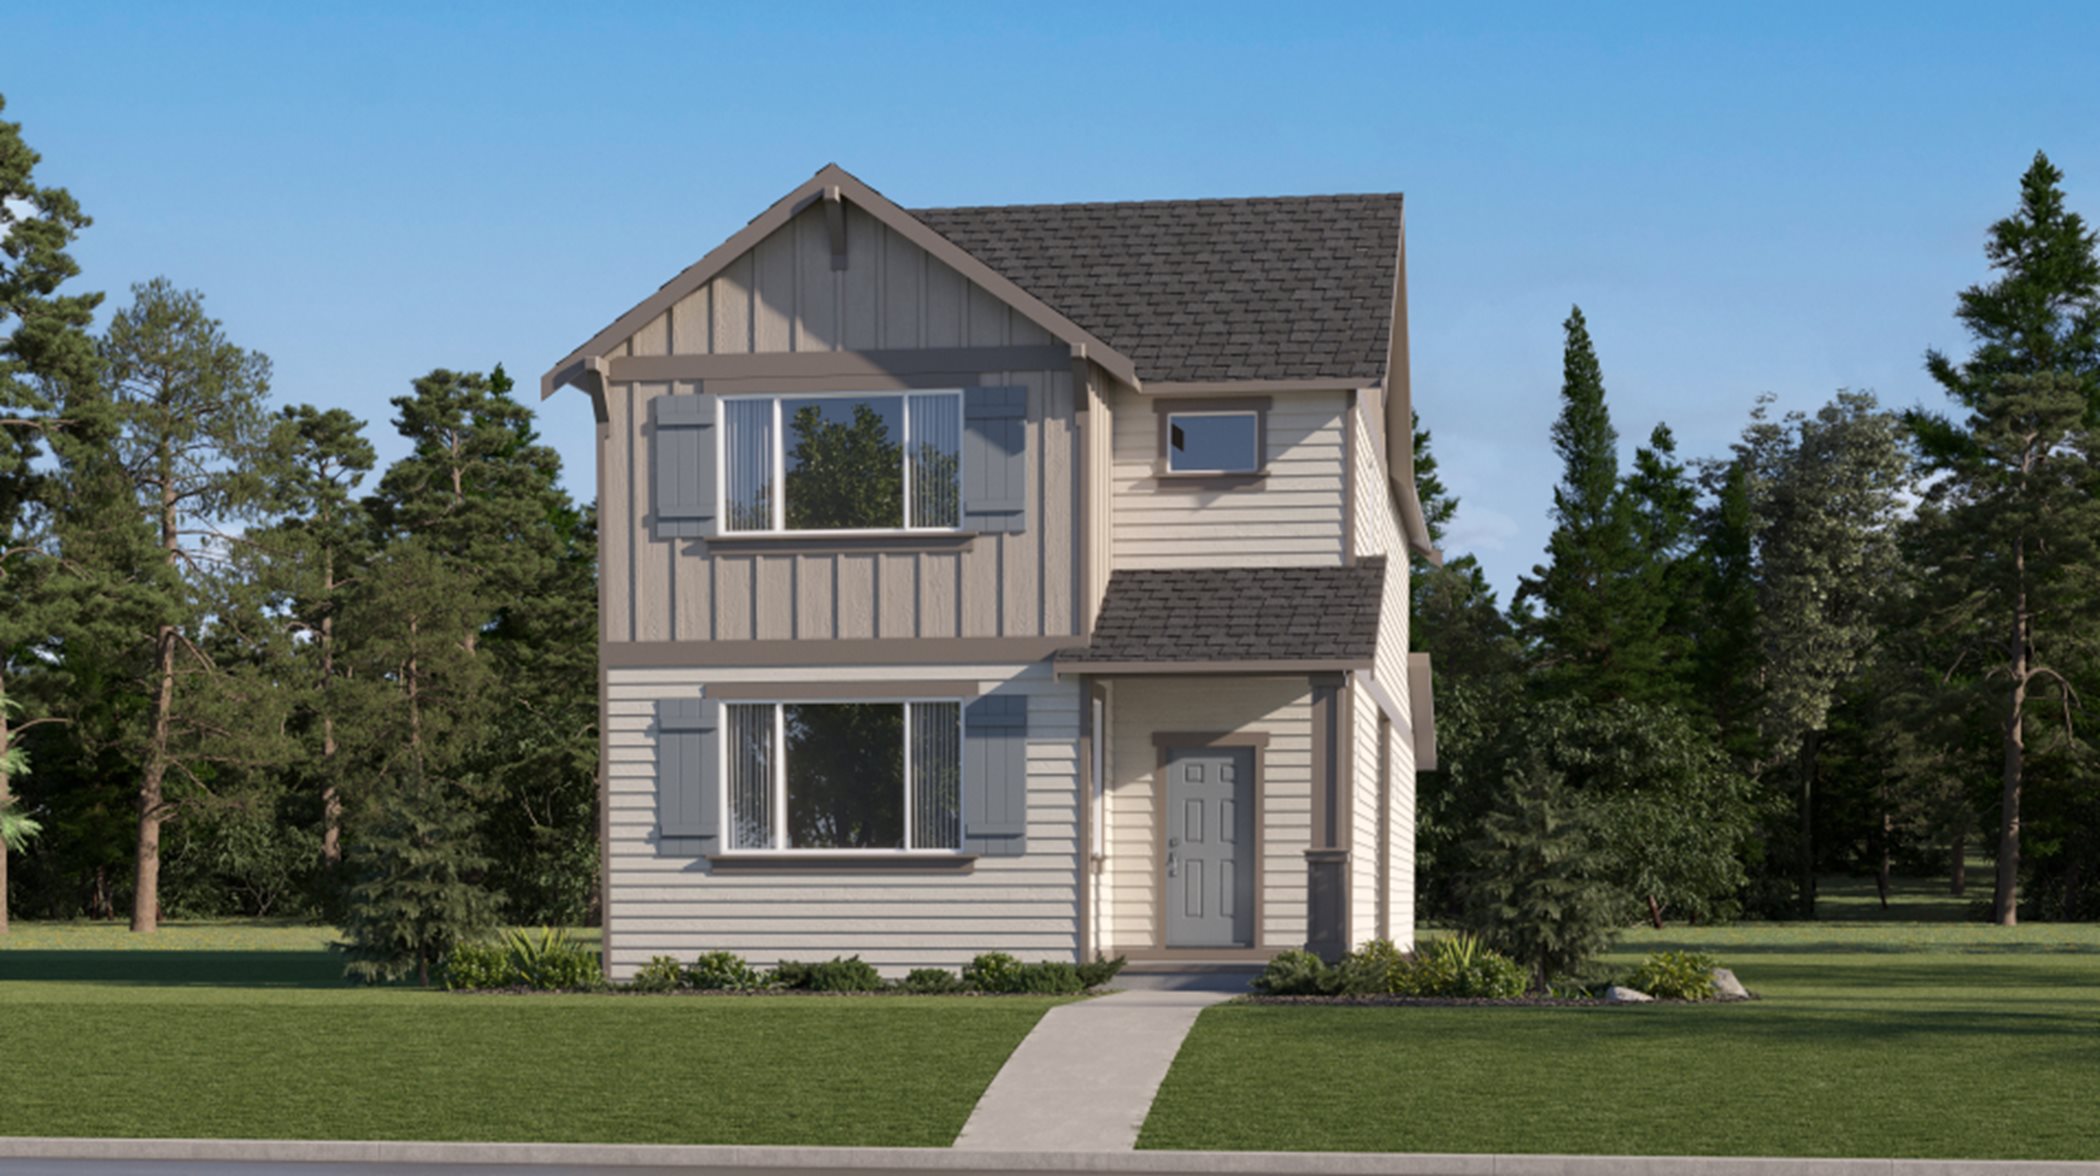 Elevation A exterior rendering